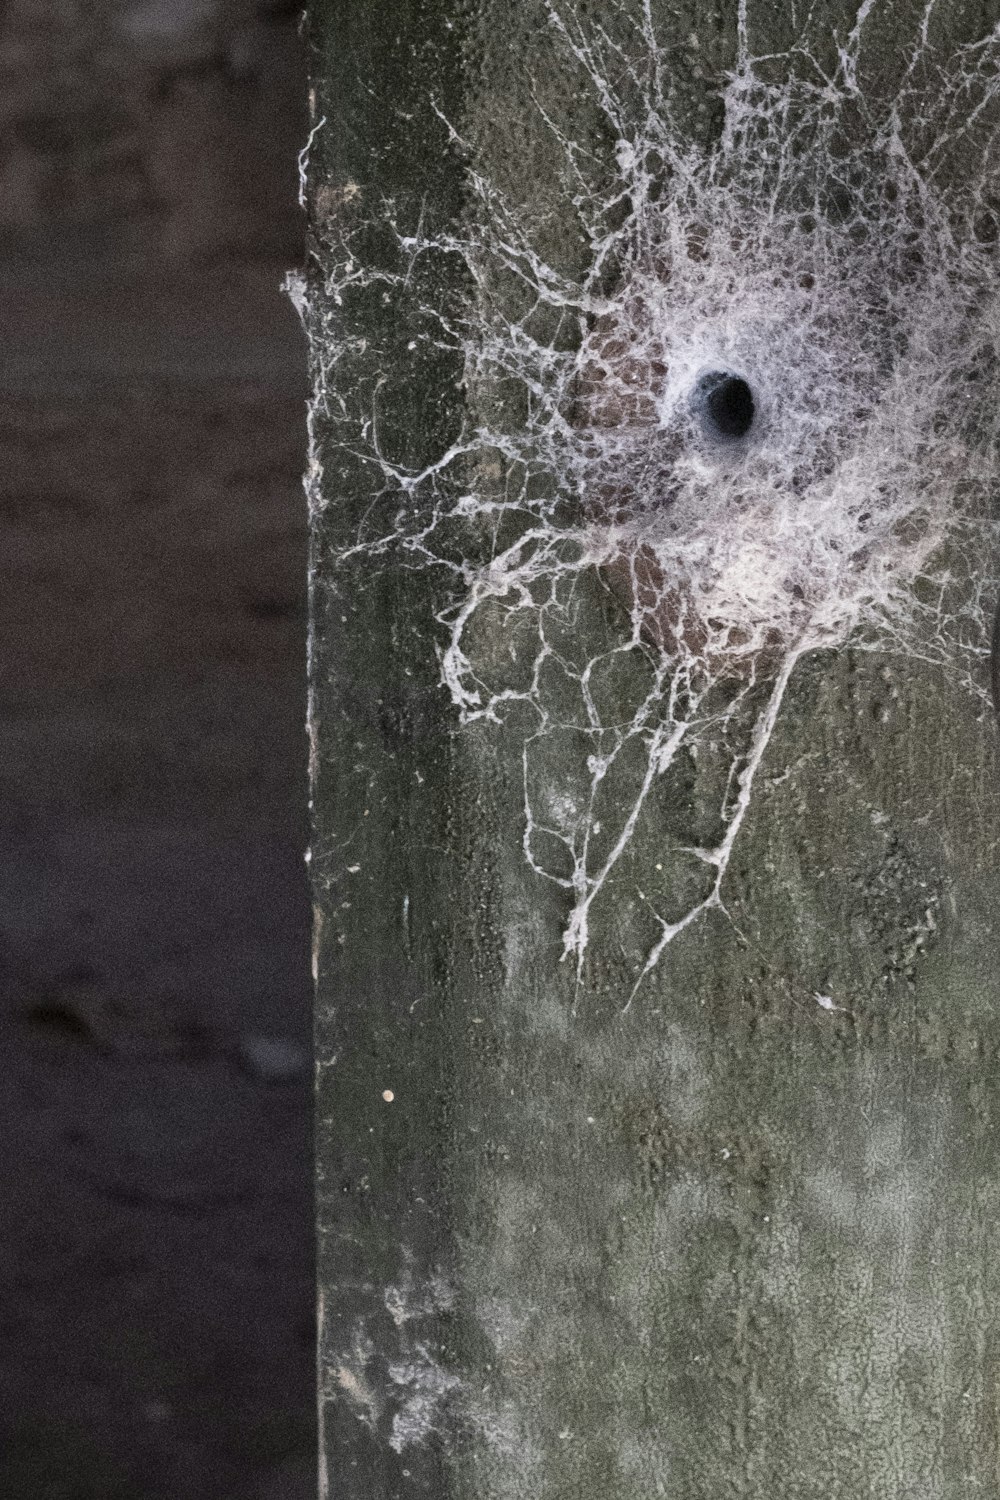 a close up of a spider web on a pole